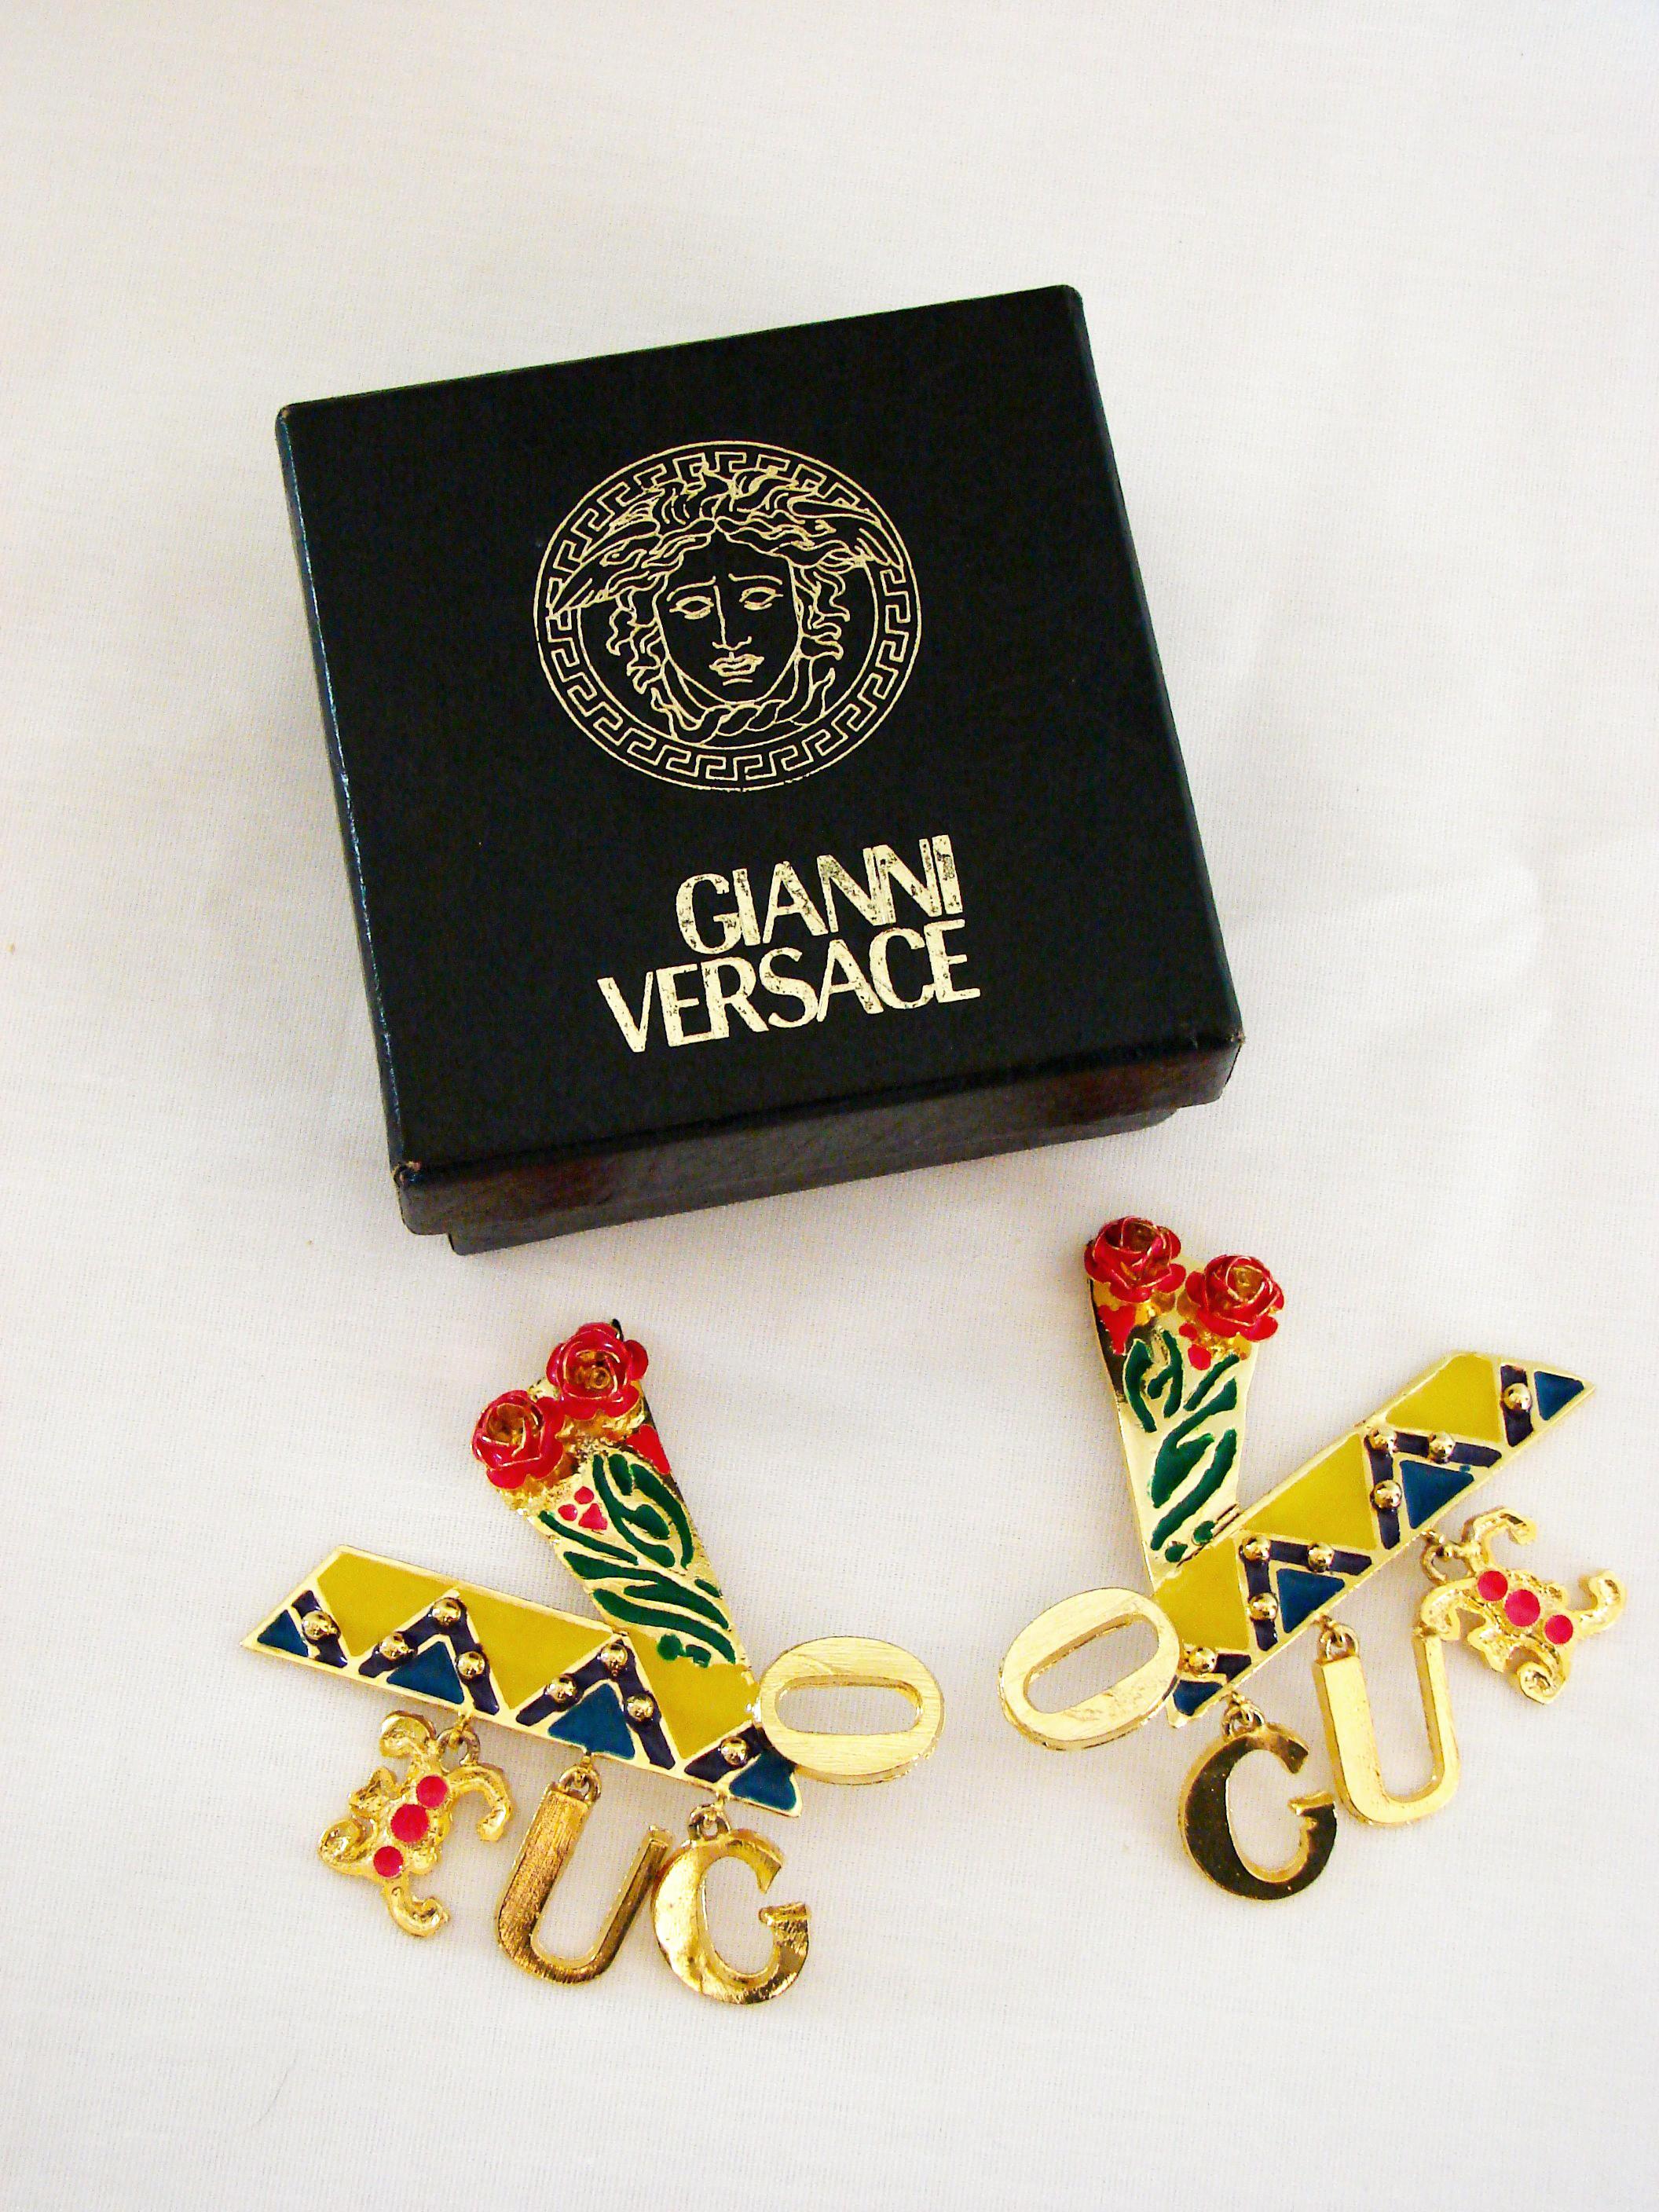 Massive gold earrings from Gianni Versace circa the 90s feature colorful enamel and rose details, and spell out the word 'Vogue' with dangling charm letters (very similar to the reboot version Donatella released at Milan Fashion week, sported by